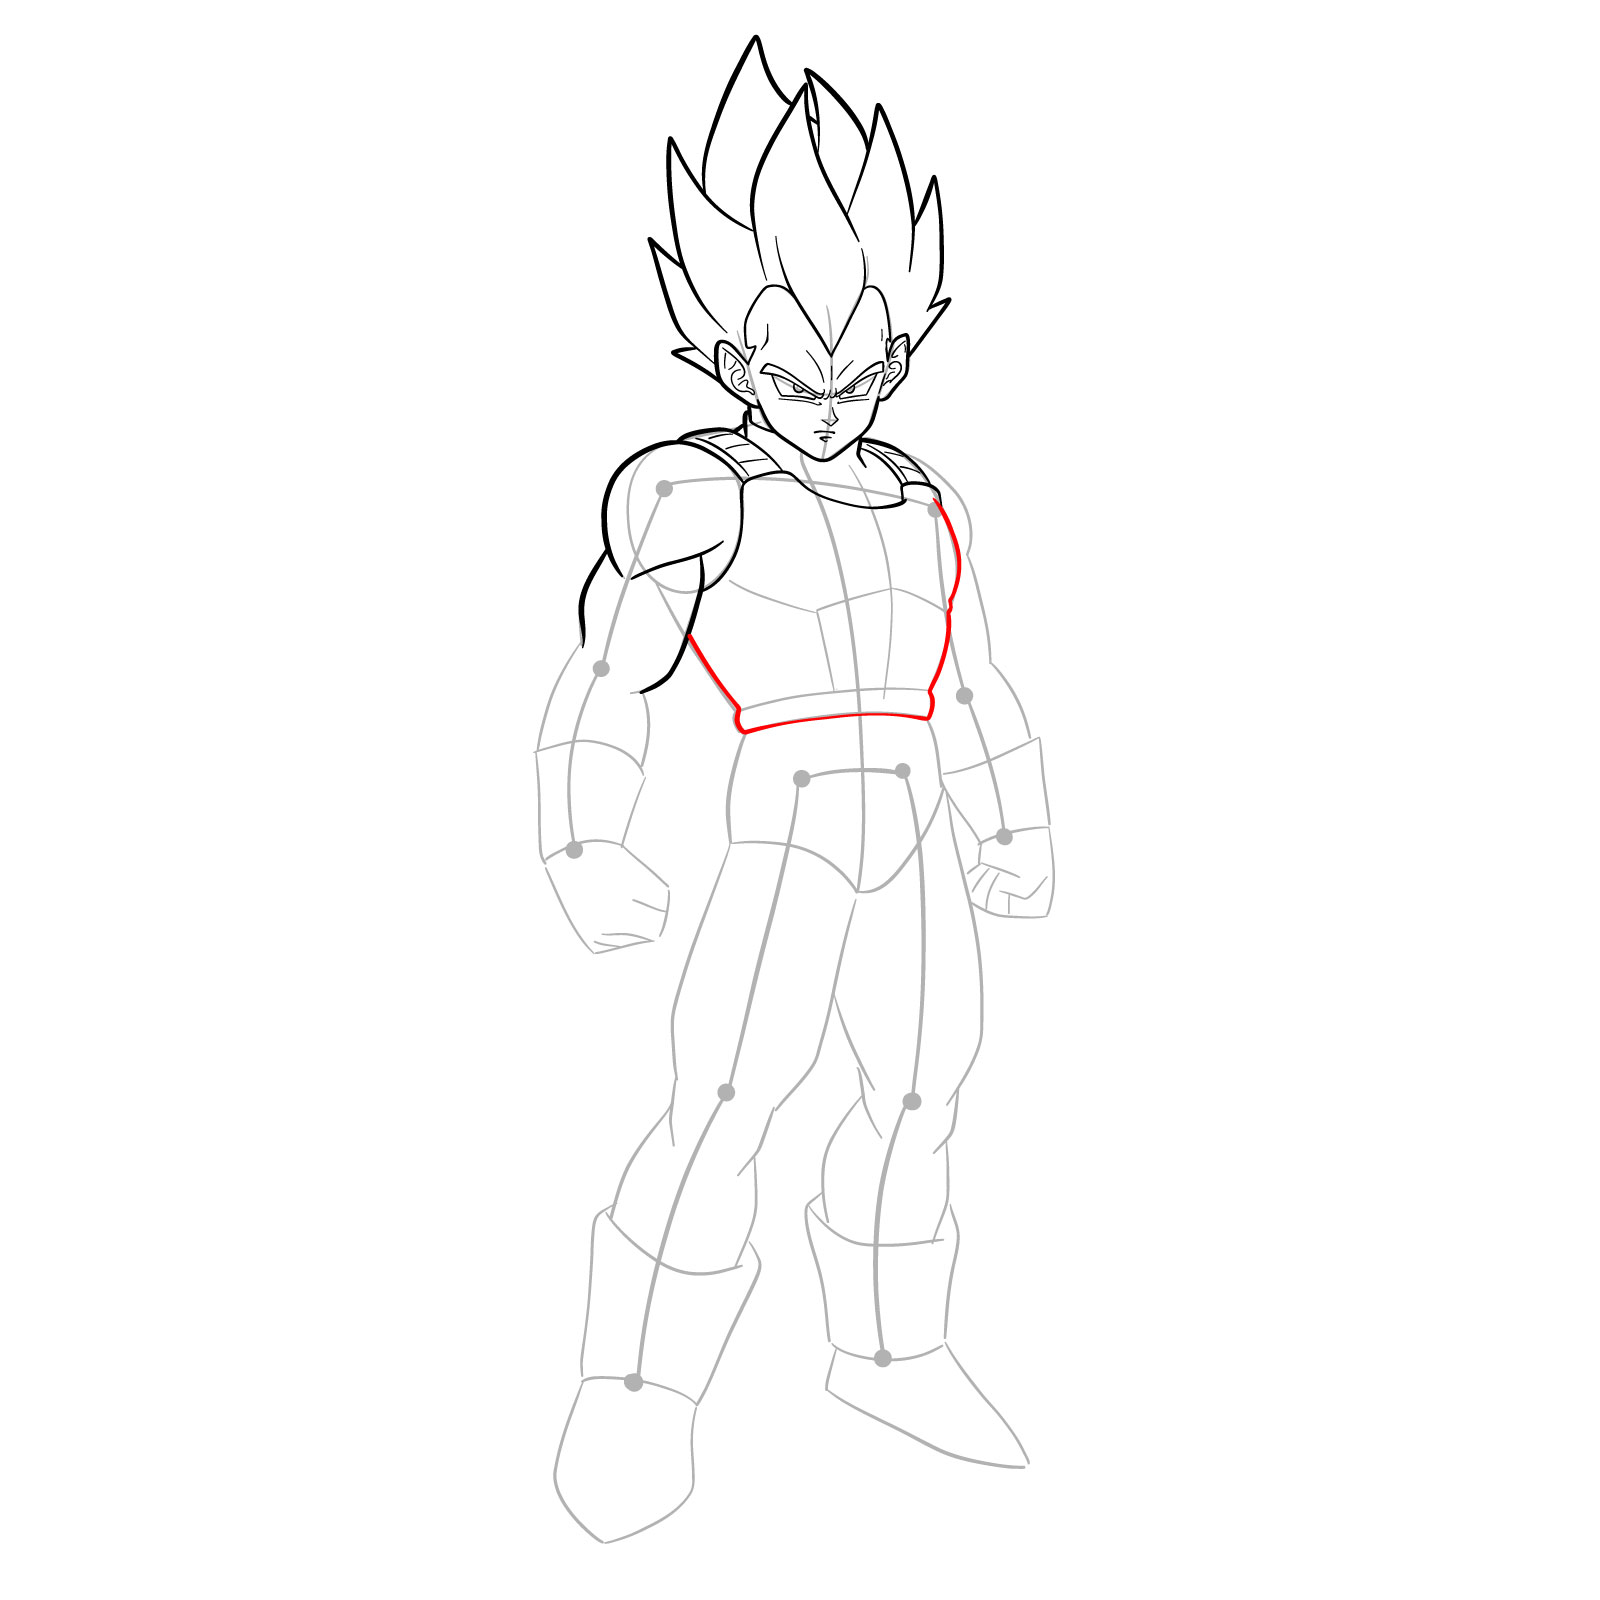 How to draw Vegeta in SSGSS - step 21